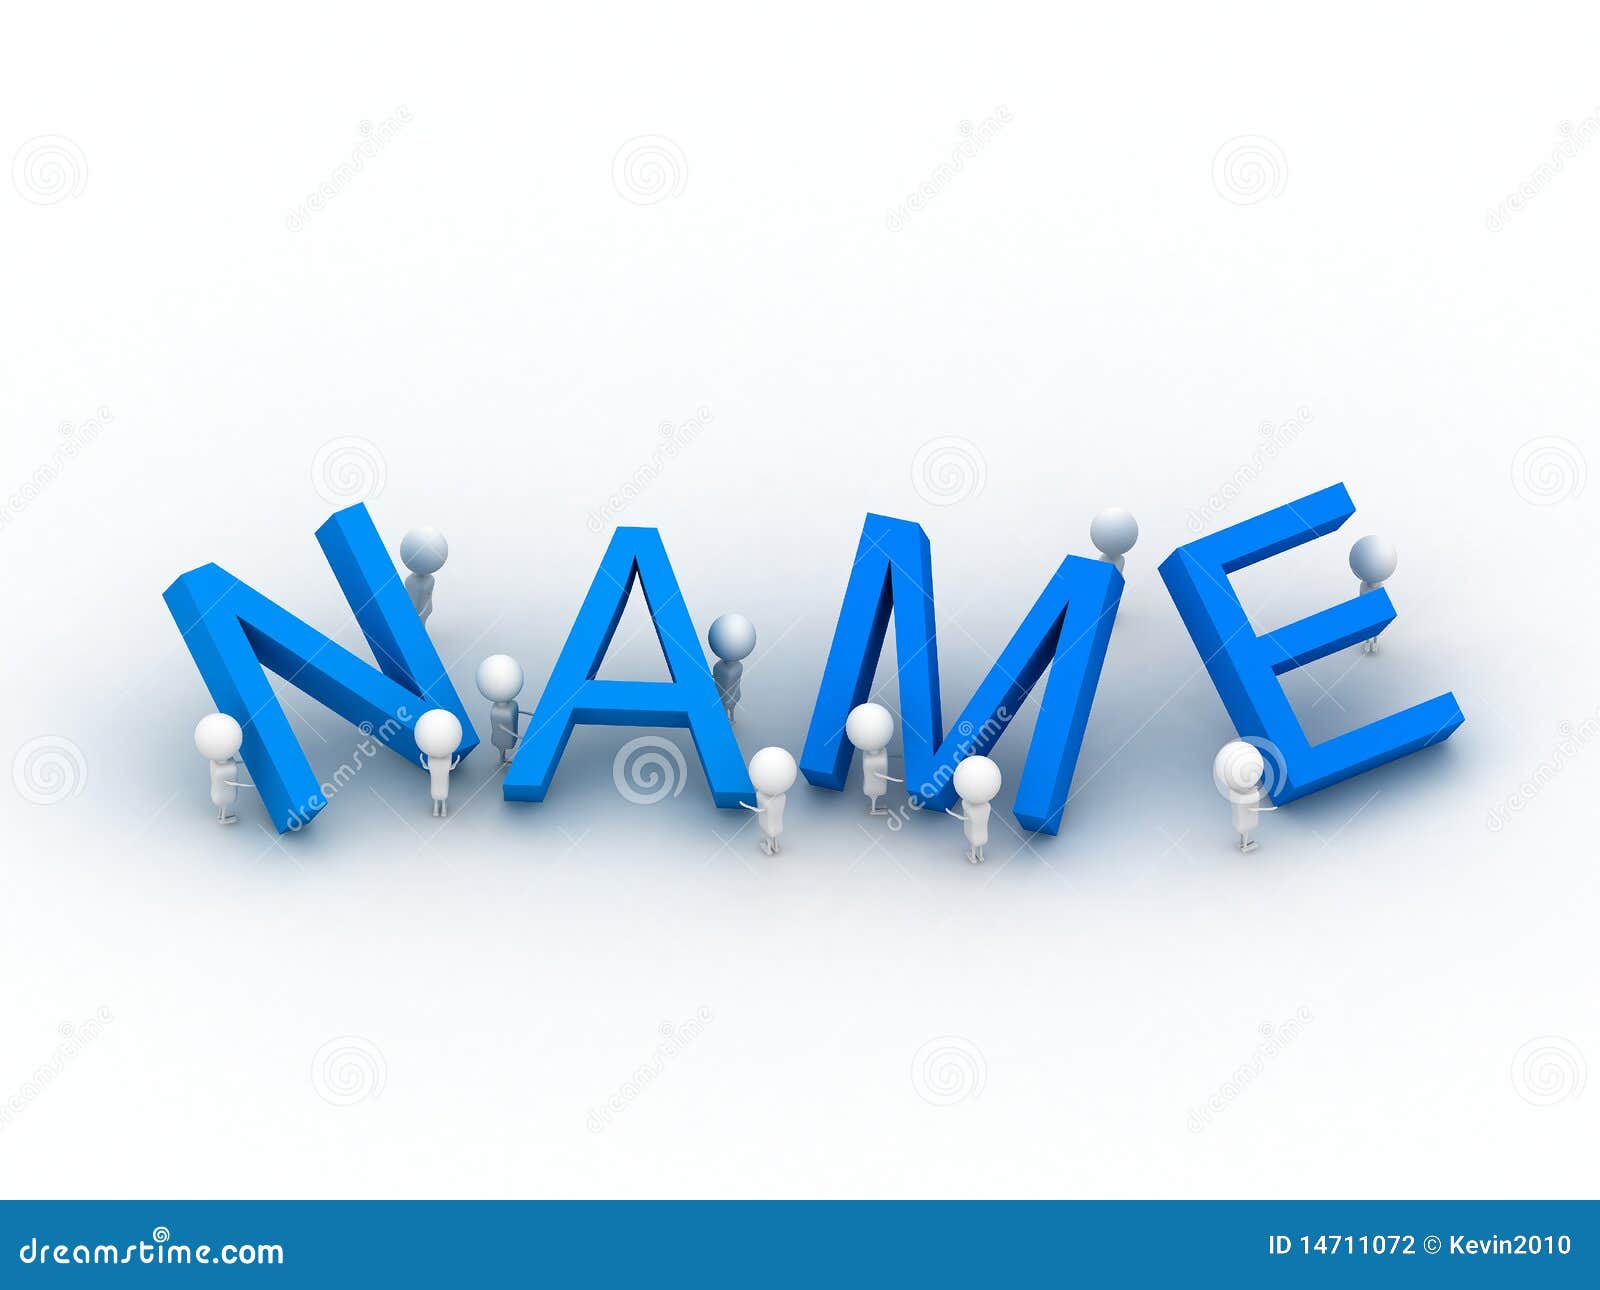 Your Name Clipart - Full Size Clipart (#46008) - PinClipart